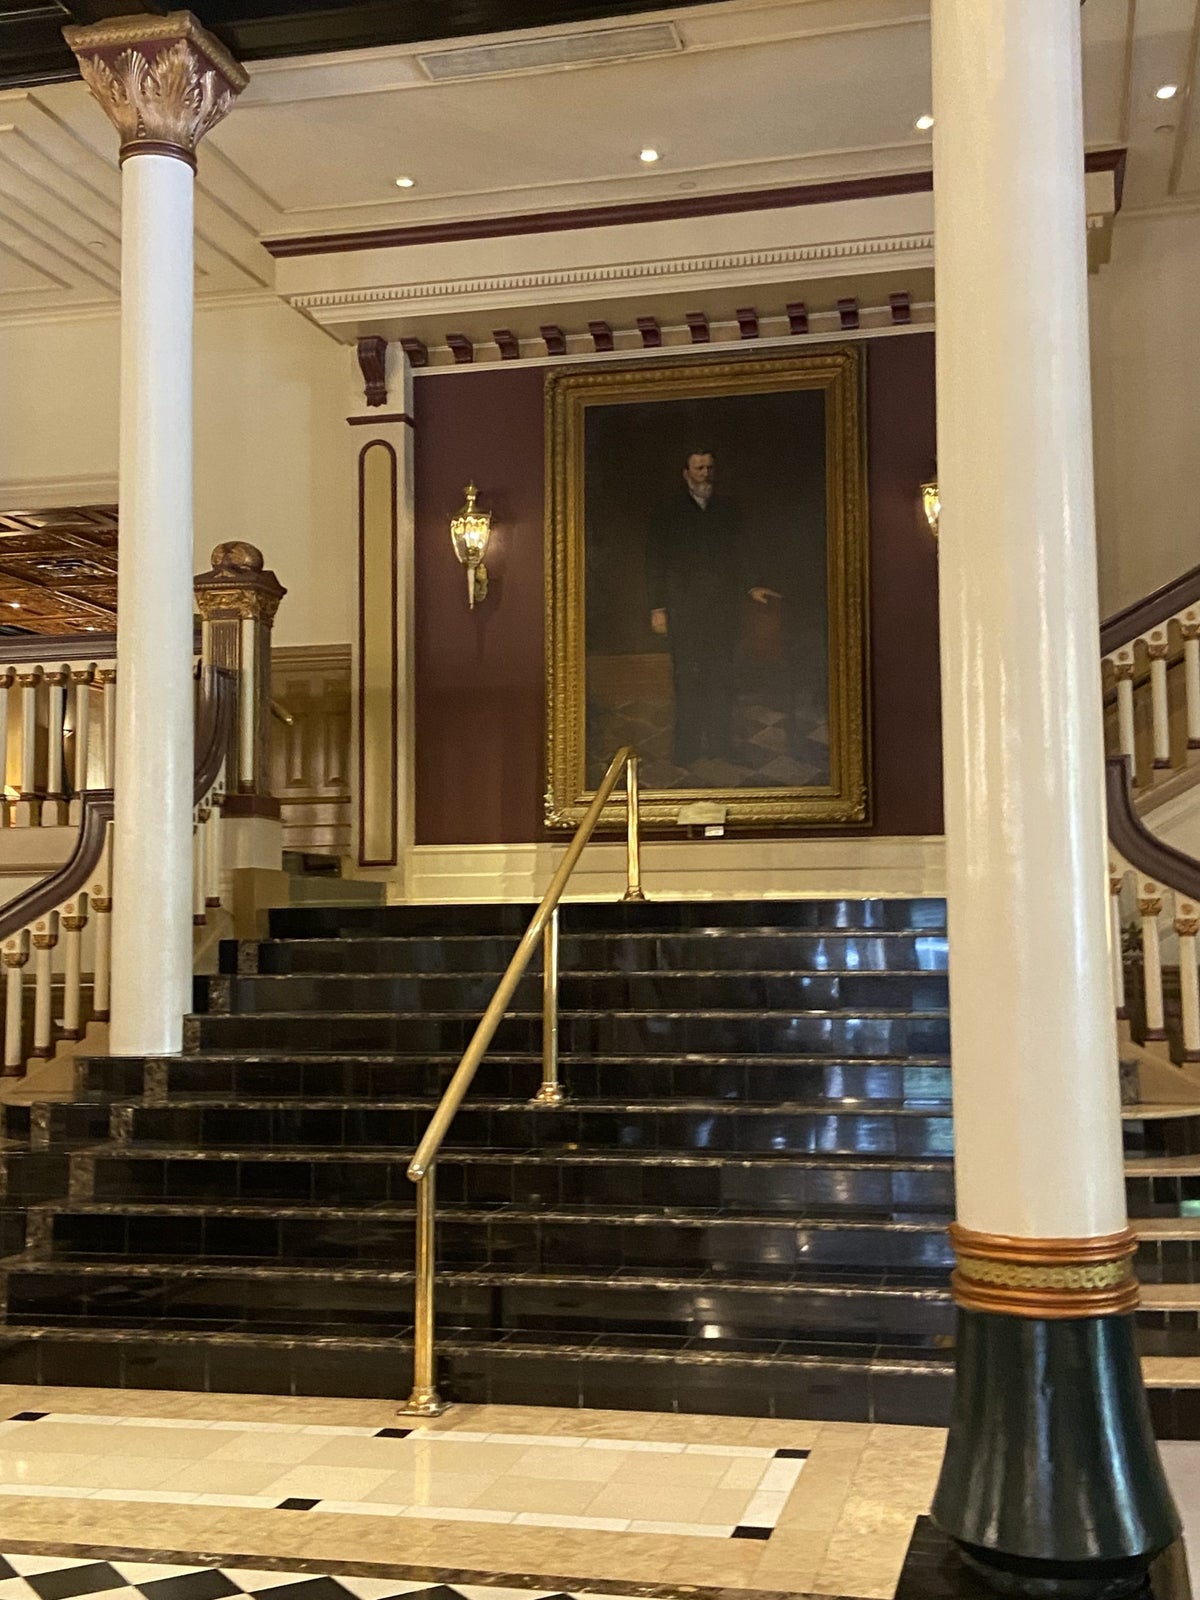 The grand staircase at The Driskill hotel